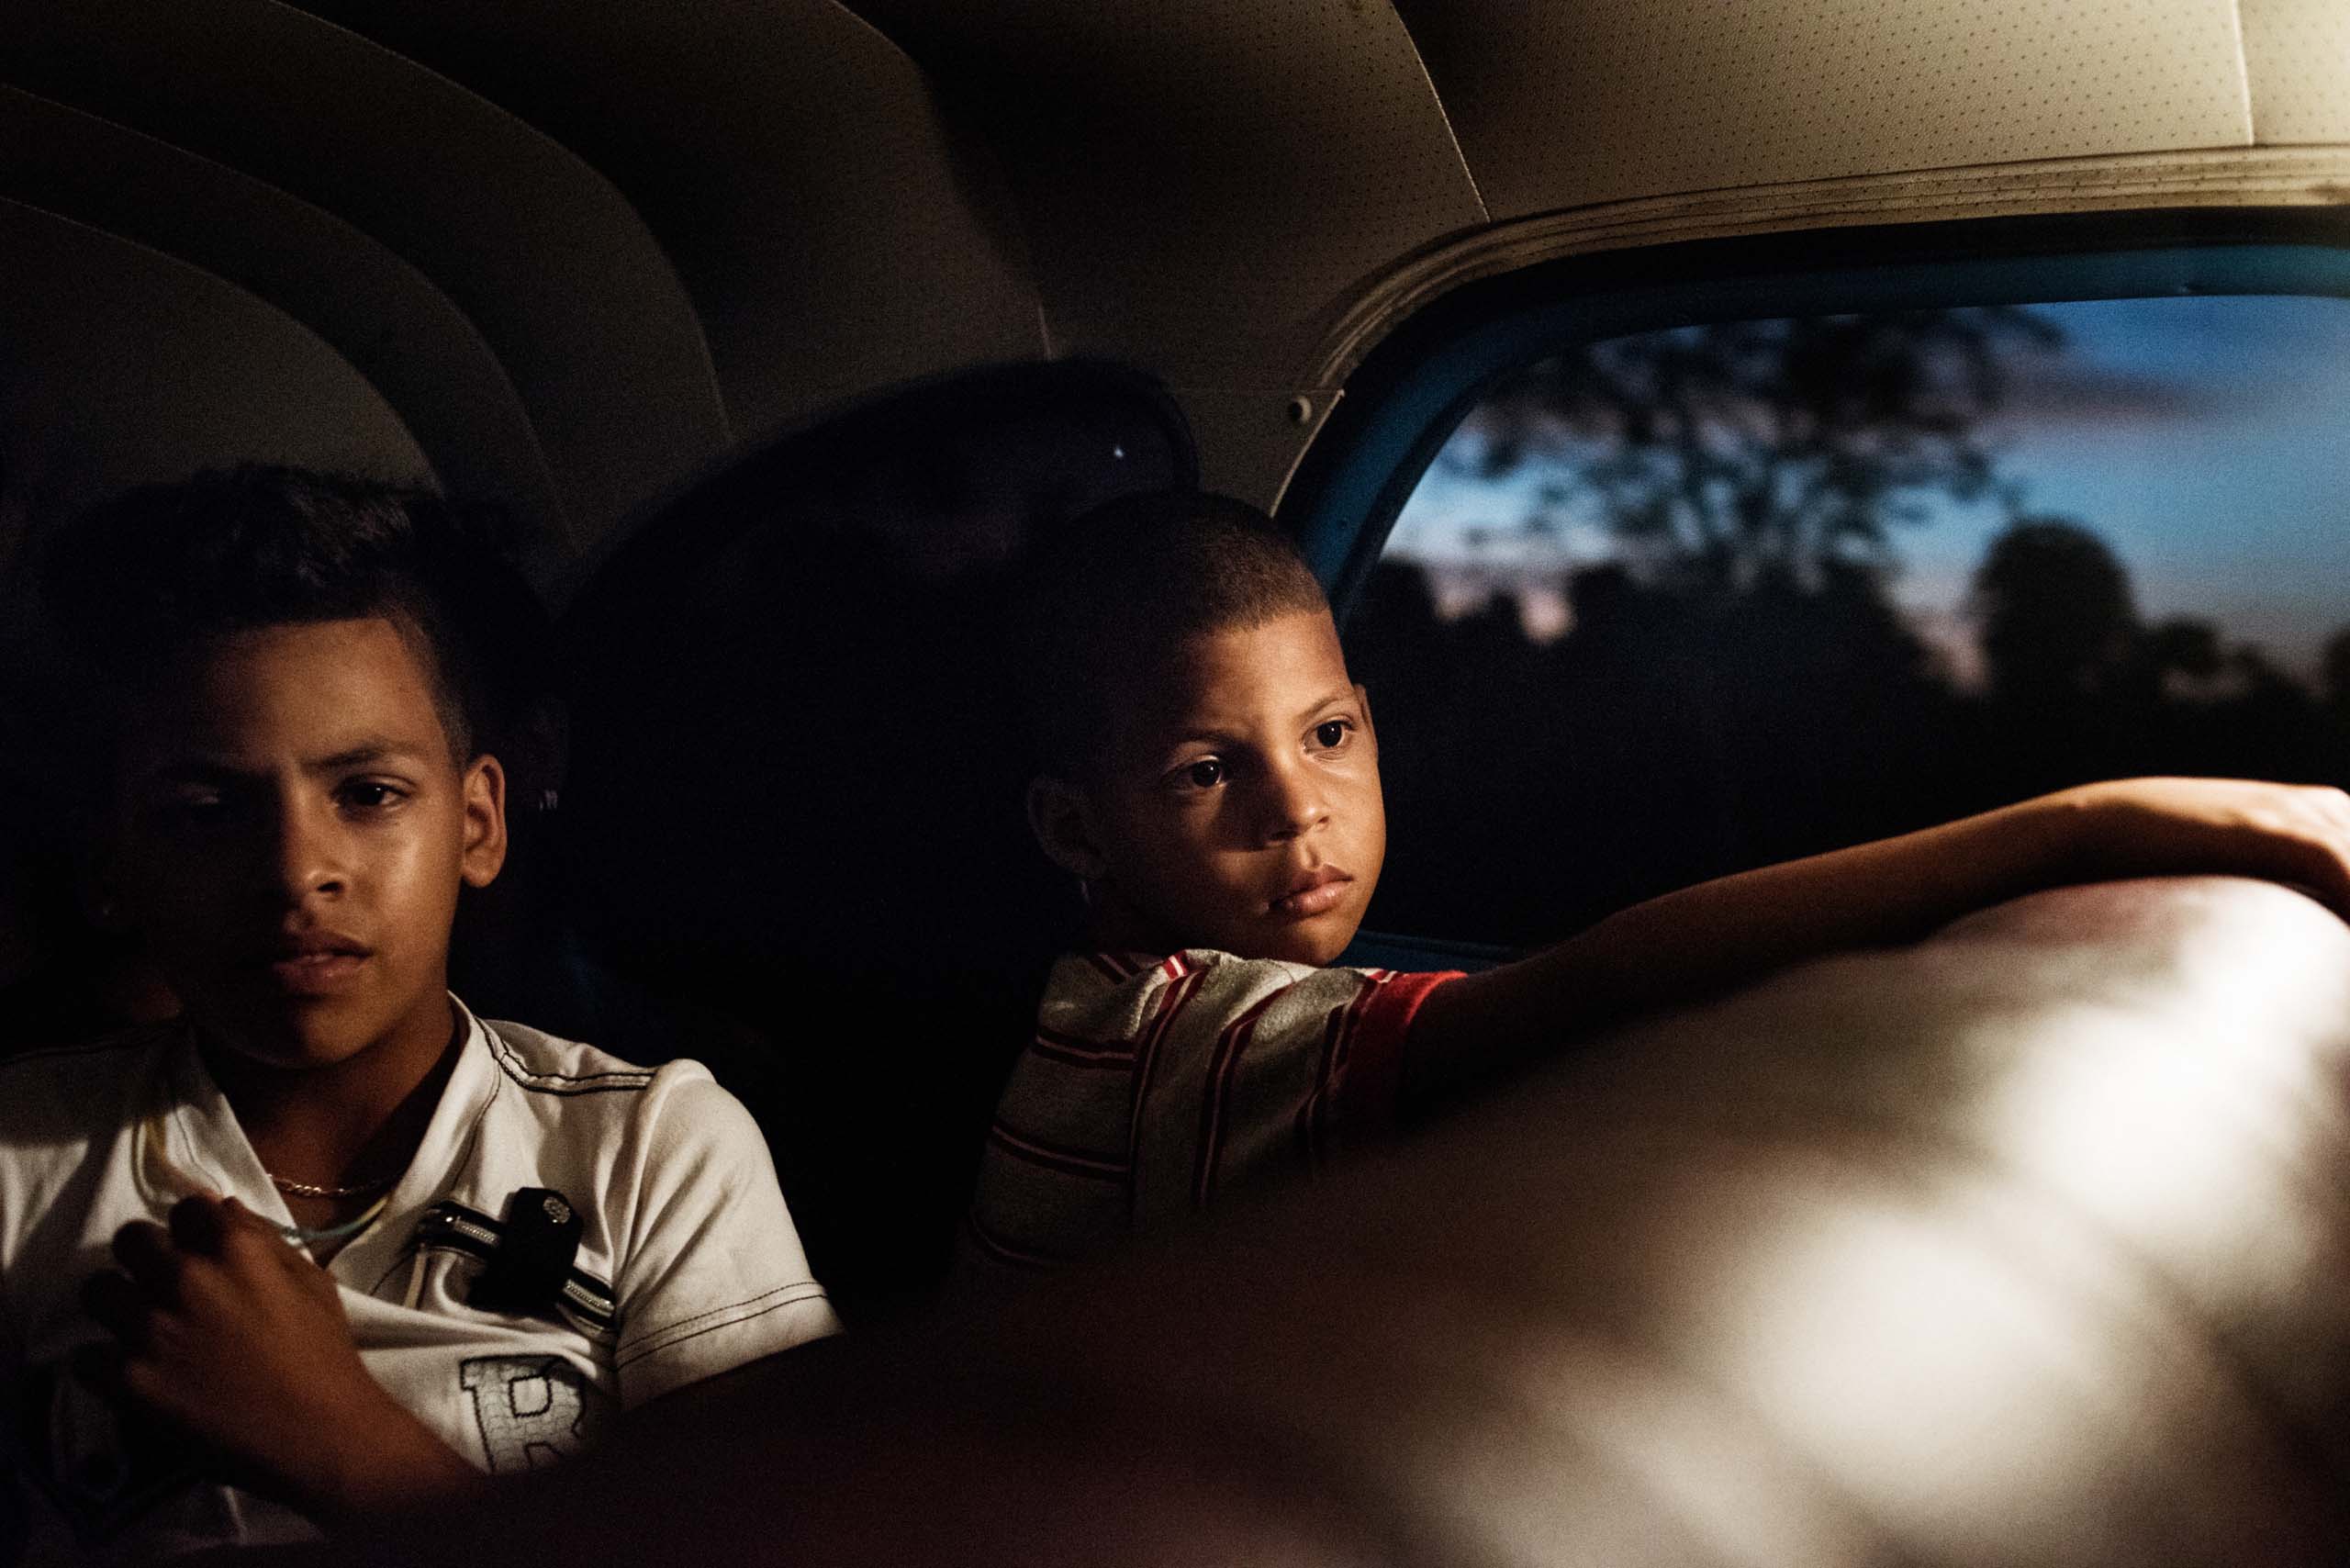 January, 2015. Children ride in a private taxi in Havana. Taxis, both shared and private, are the main form of transport for many Cubans.